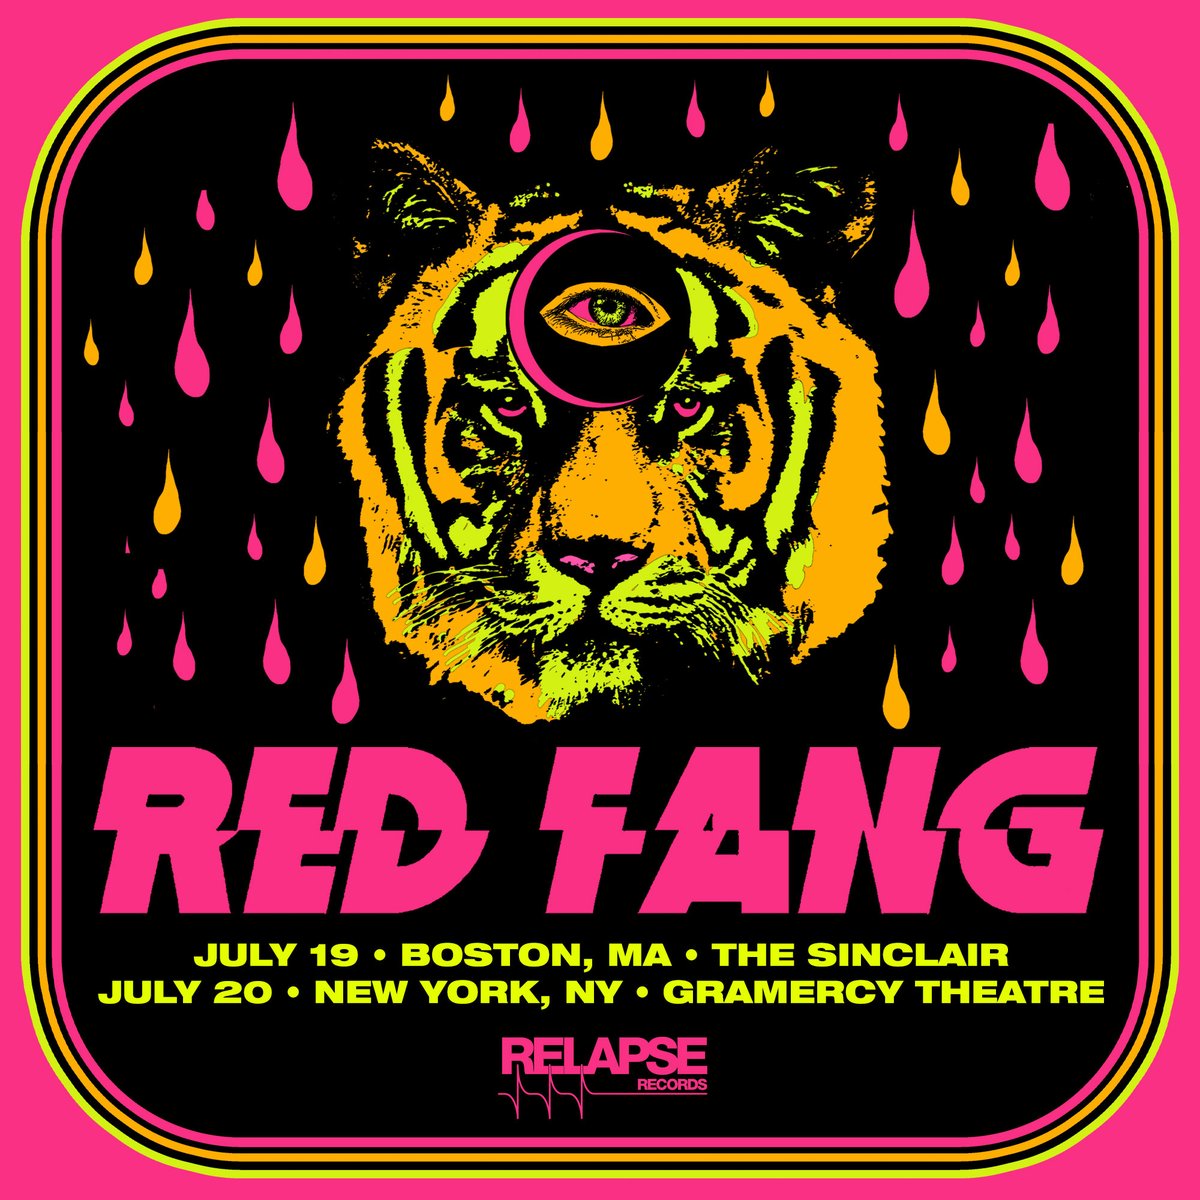 Two special RED FANG headline shows in Boston (July 19) & New York (July 20) before the @clutchofficial & @dinosaurjr tour! Tickets on sale Fri, Mar 31, 2023 @ 10:00am ET redfang.net/live.html